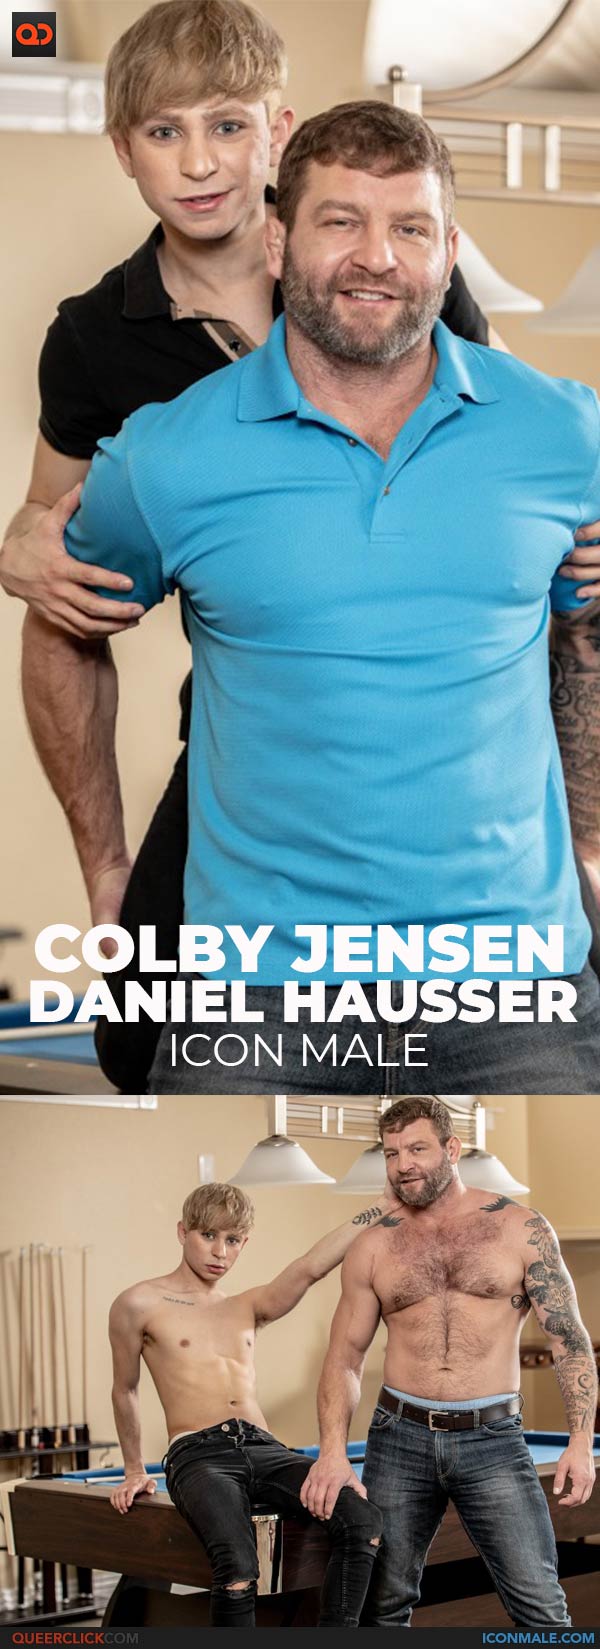 IconMale: Daniel Hausser and Colby Jensen